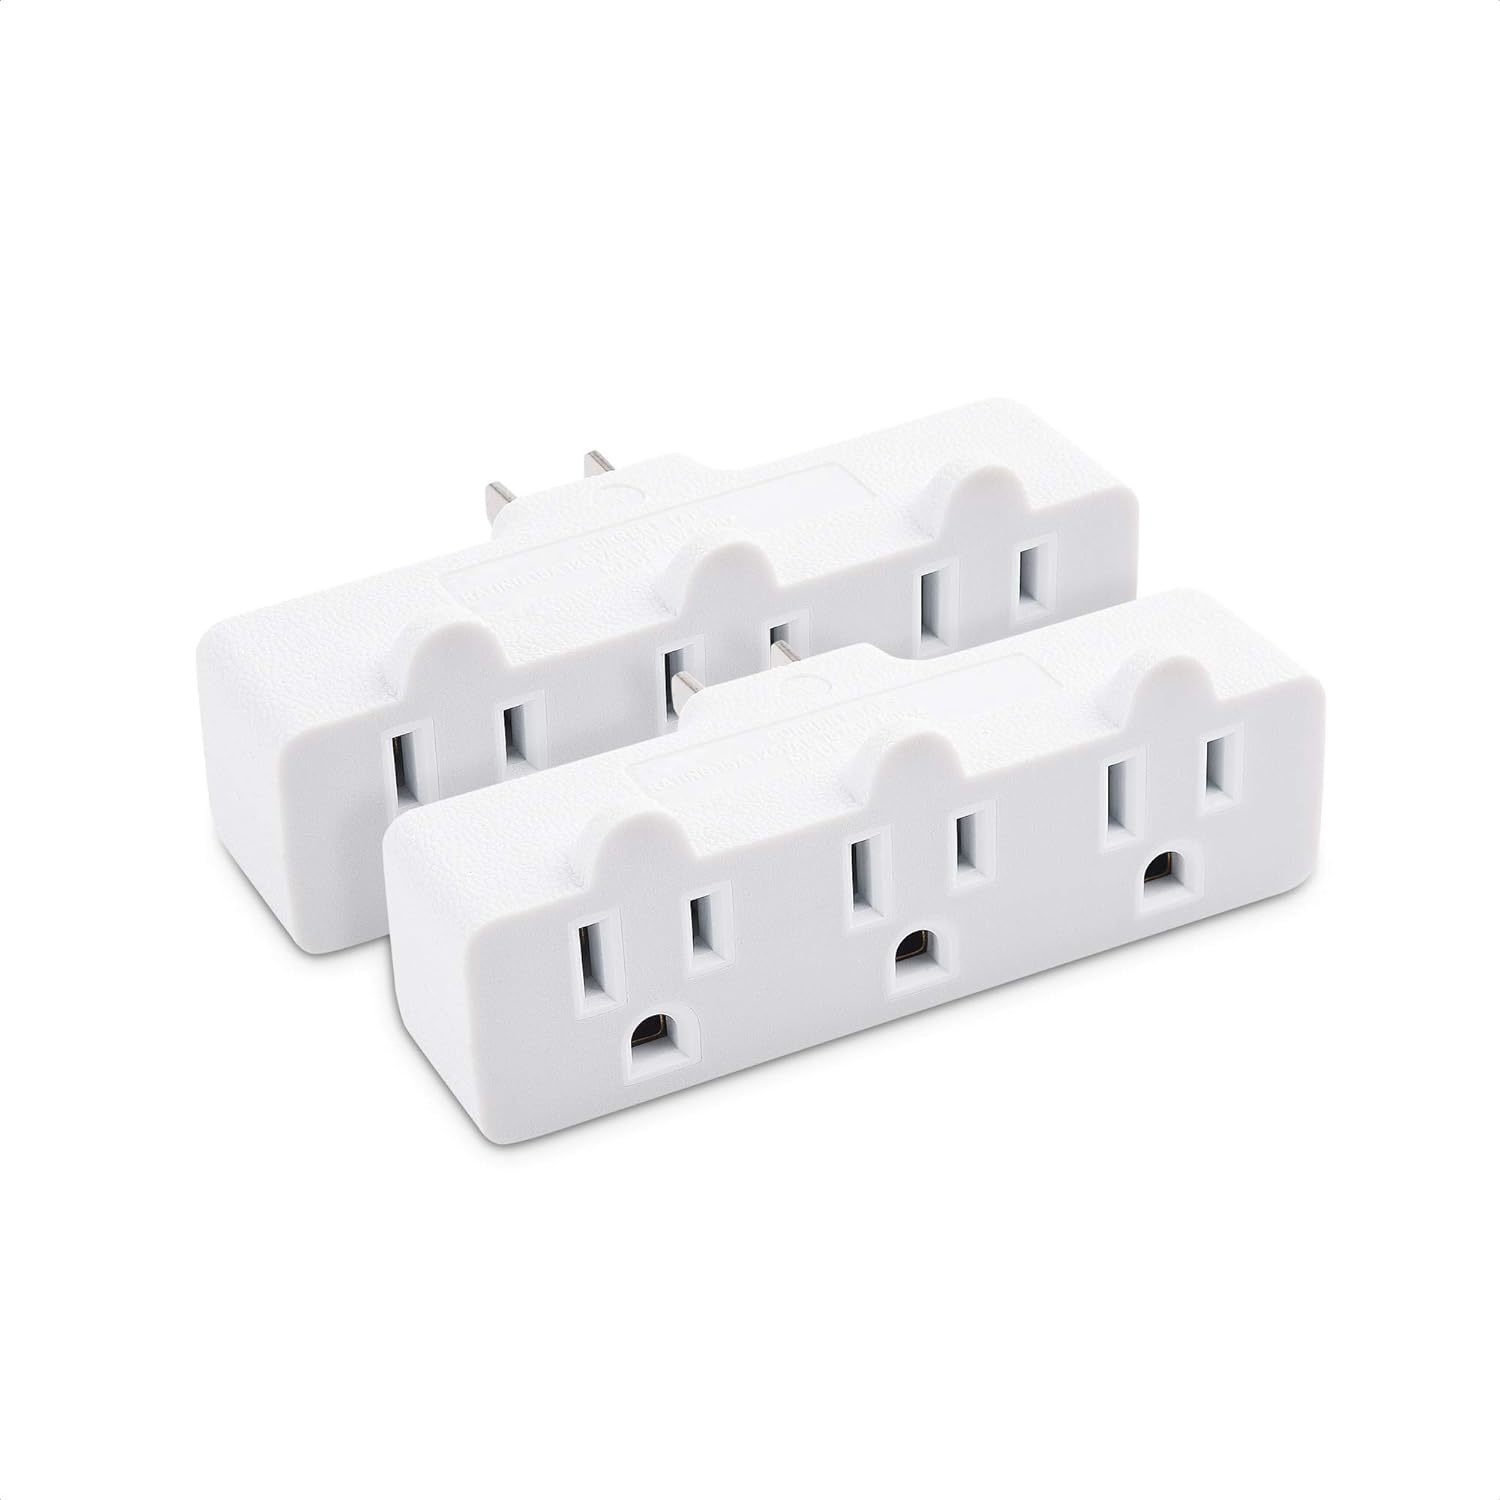 Primary image for Cable Matters 2-Pack Spaced 3 Outlet Grounded Outlet Extender Wall Tap